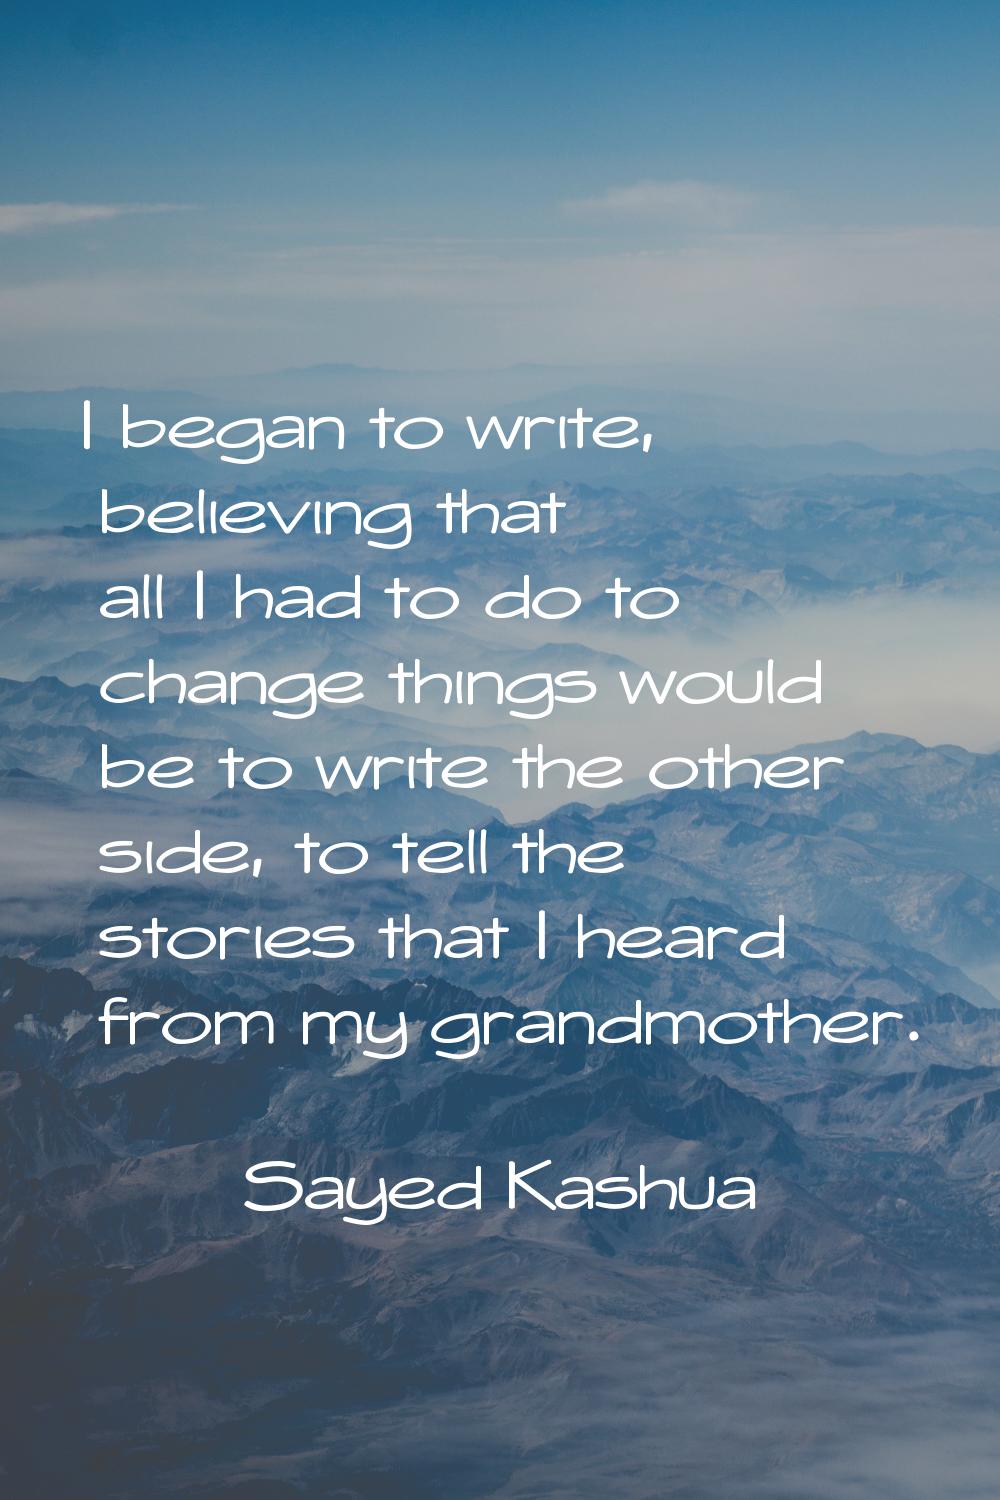 I began to write, believing that all I had to do to change things would be to write the other side,